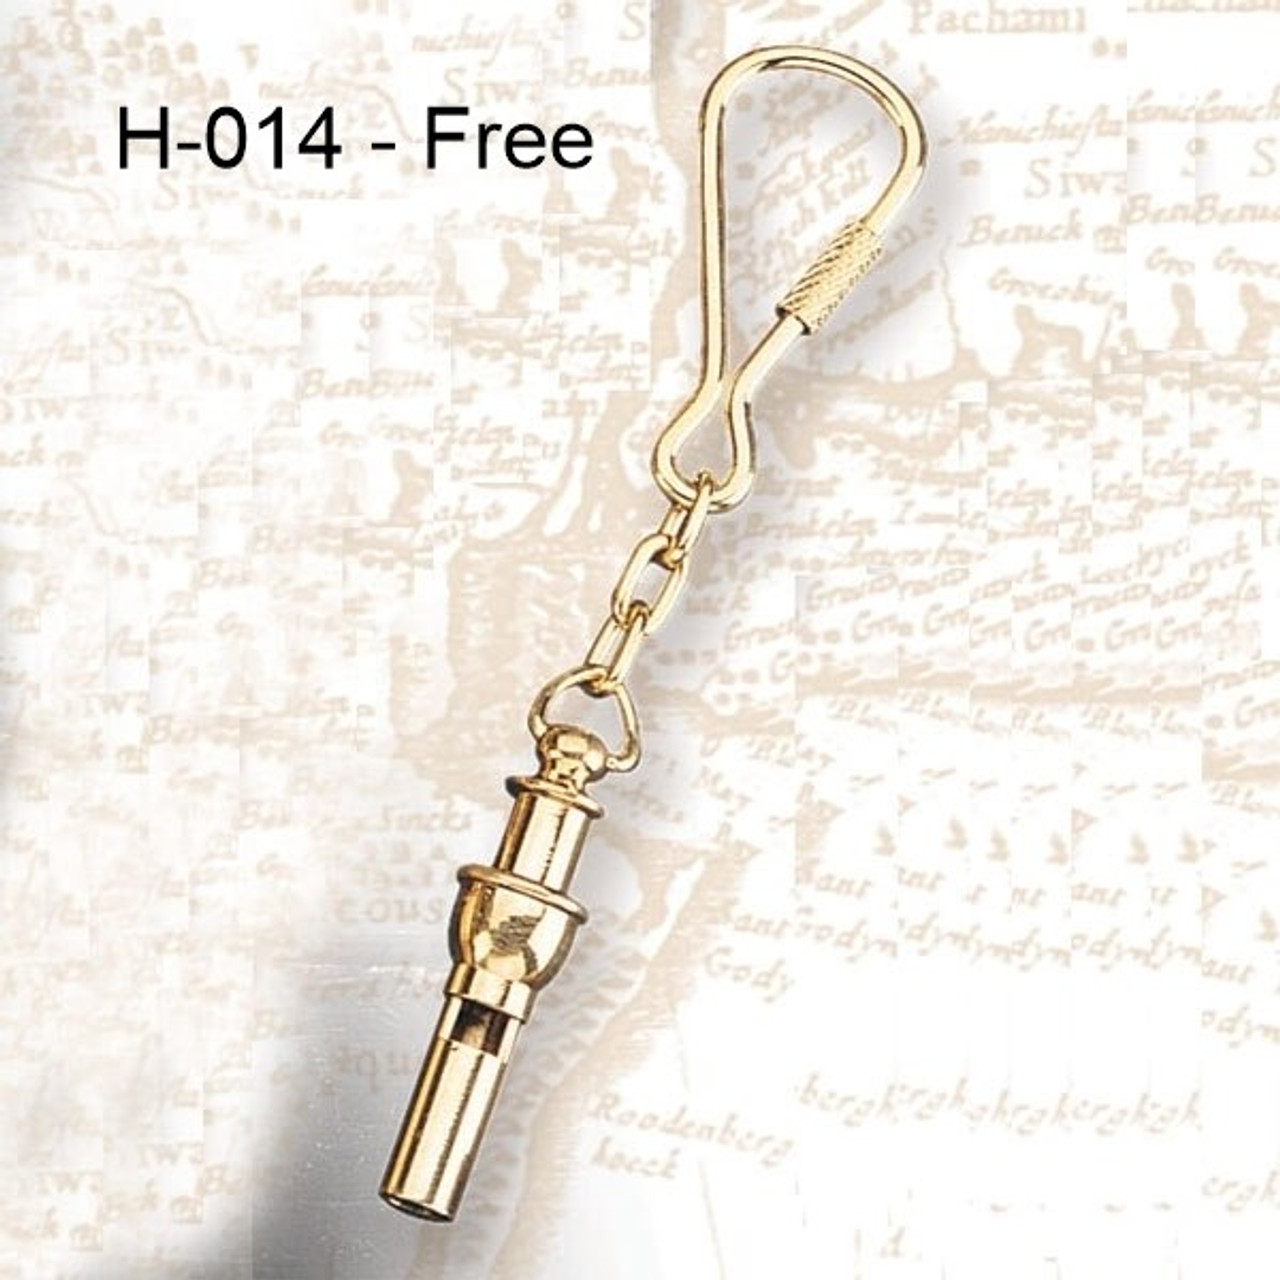 H - 014 -  Bosun's Whistle Key Chain Option
Free with Purchase of (FB-08) 8" Brass "Fire" Bell